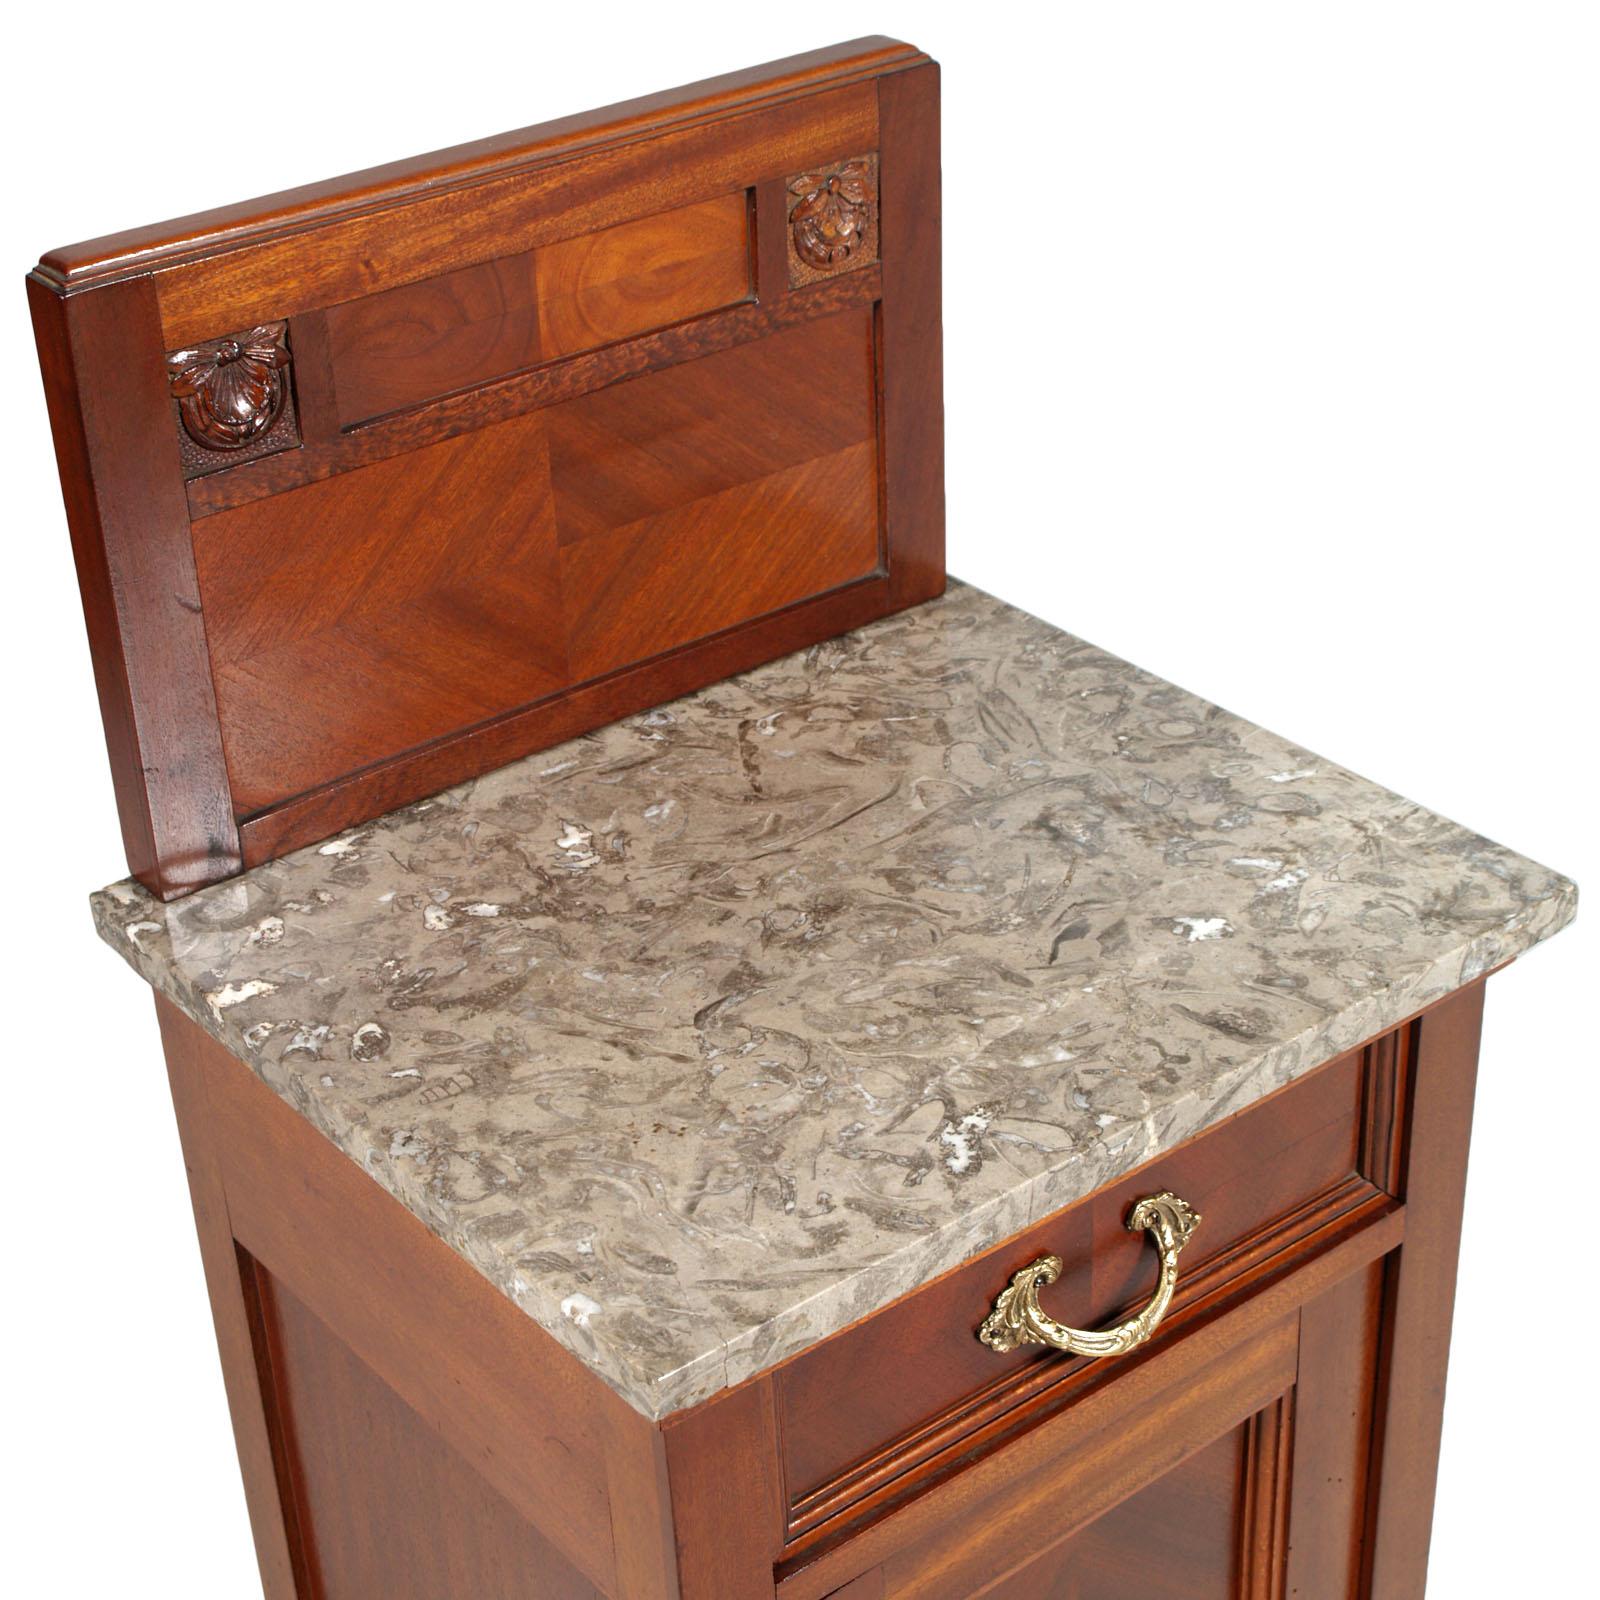 Early 20th century Italian Art Nouveau bedside table, nightstand in mahogany, marble top, restored polished with wax.
Measures cm: H 110\83, W 45, D 40.